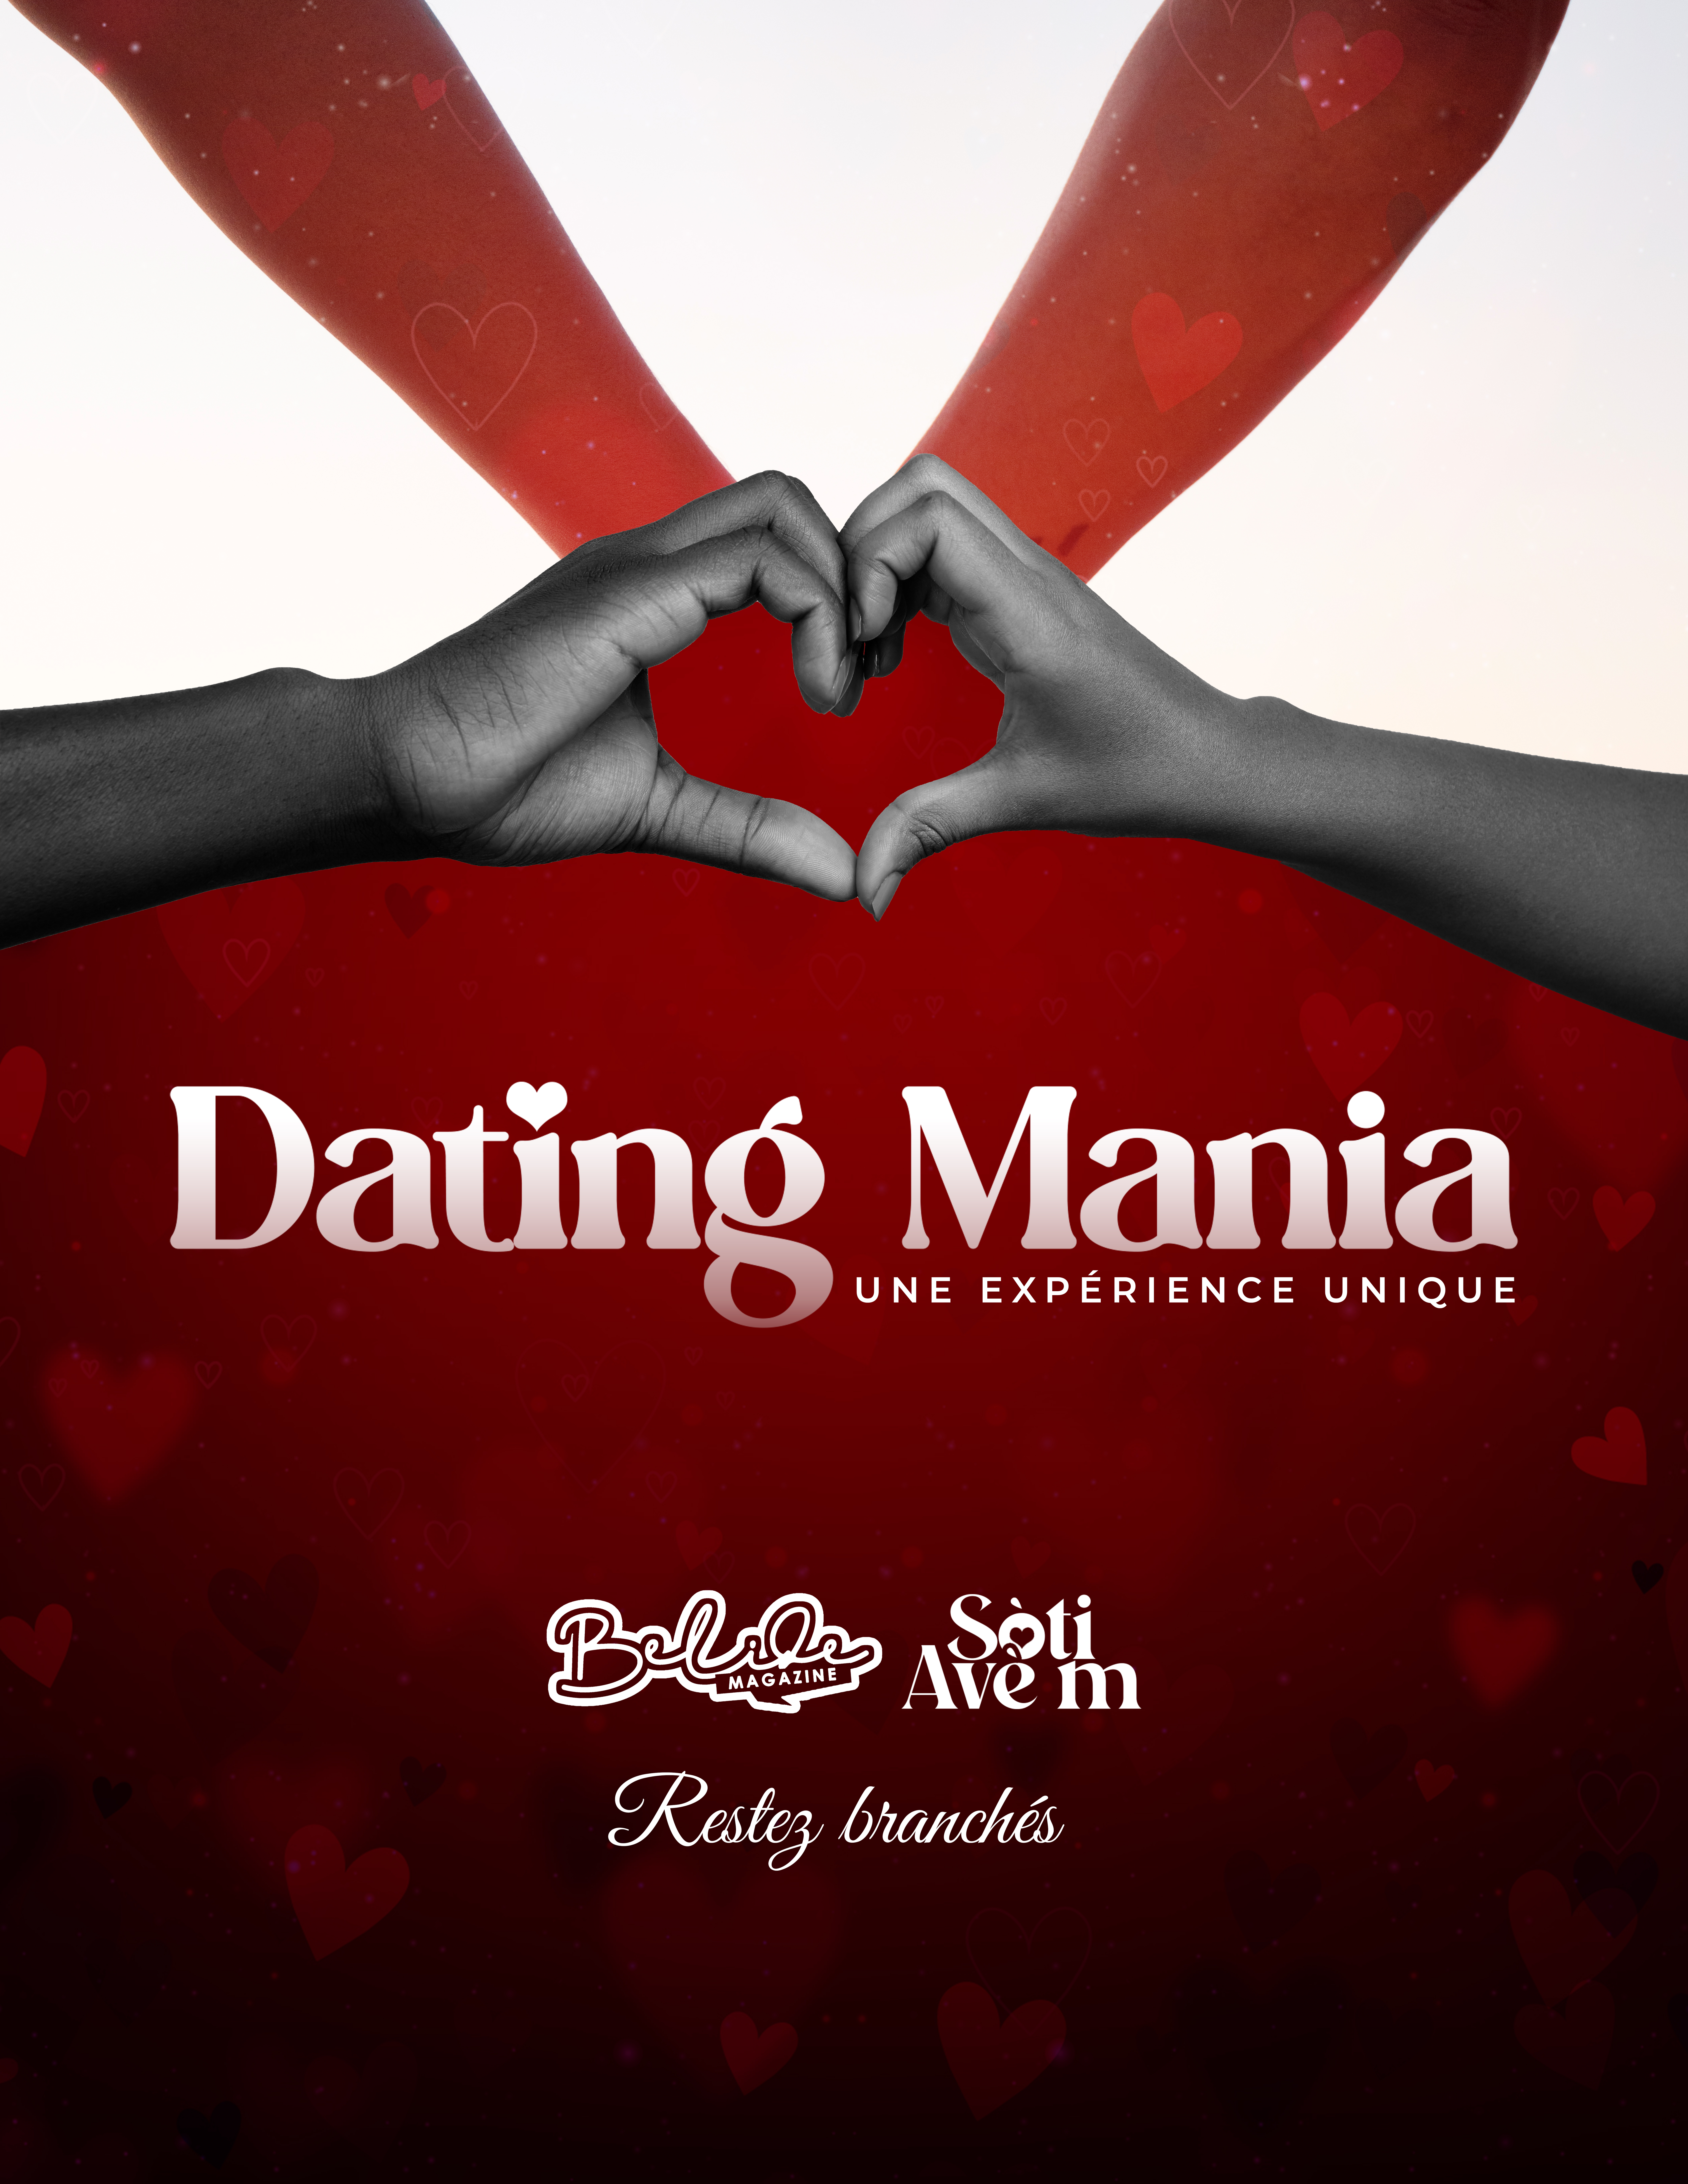 Dating-Mania-Promotional-Flyer-Coming-Soon-2